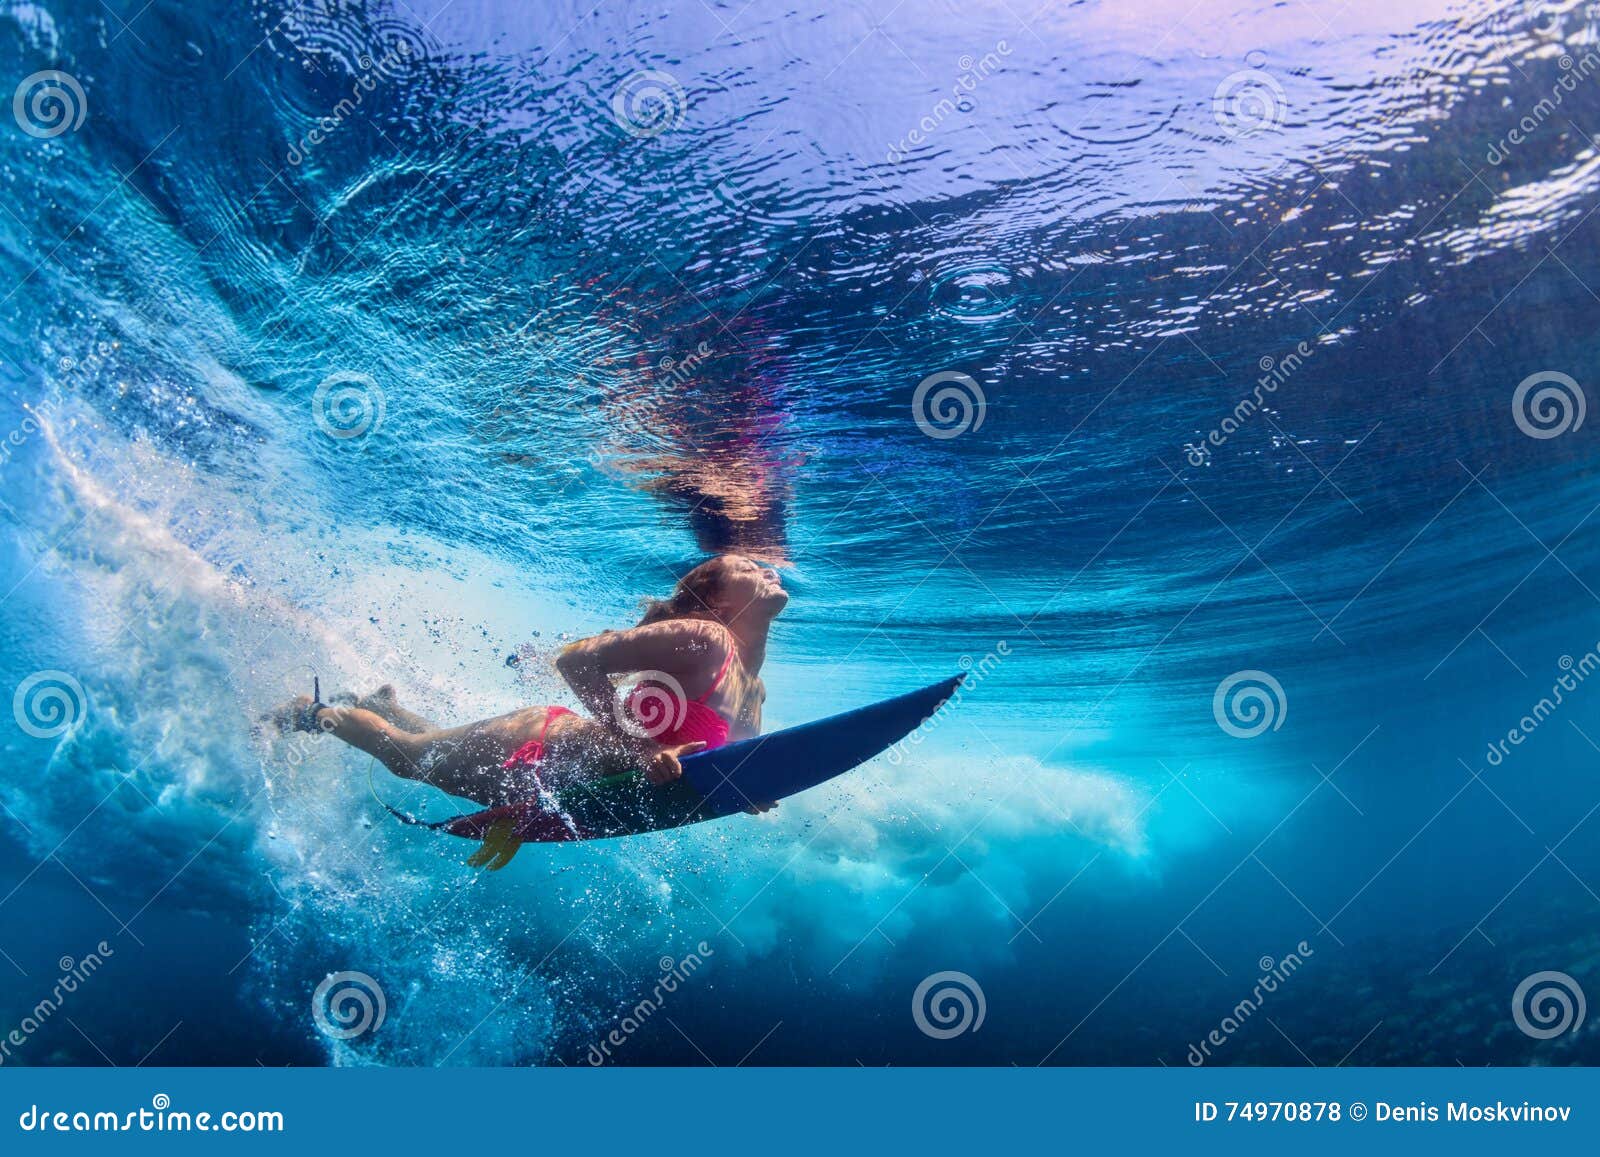 beautiful surfer girl diving under water with surf board